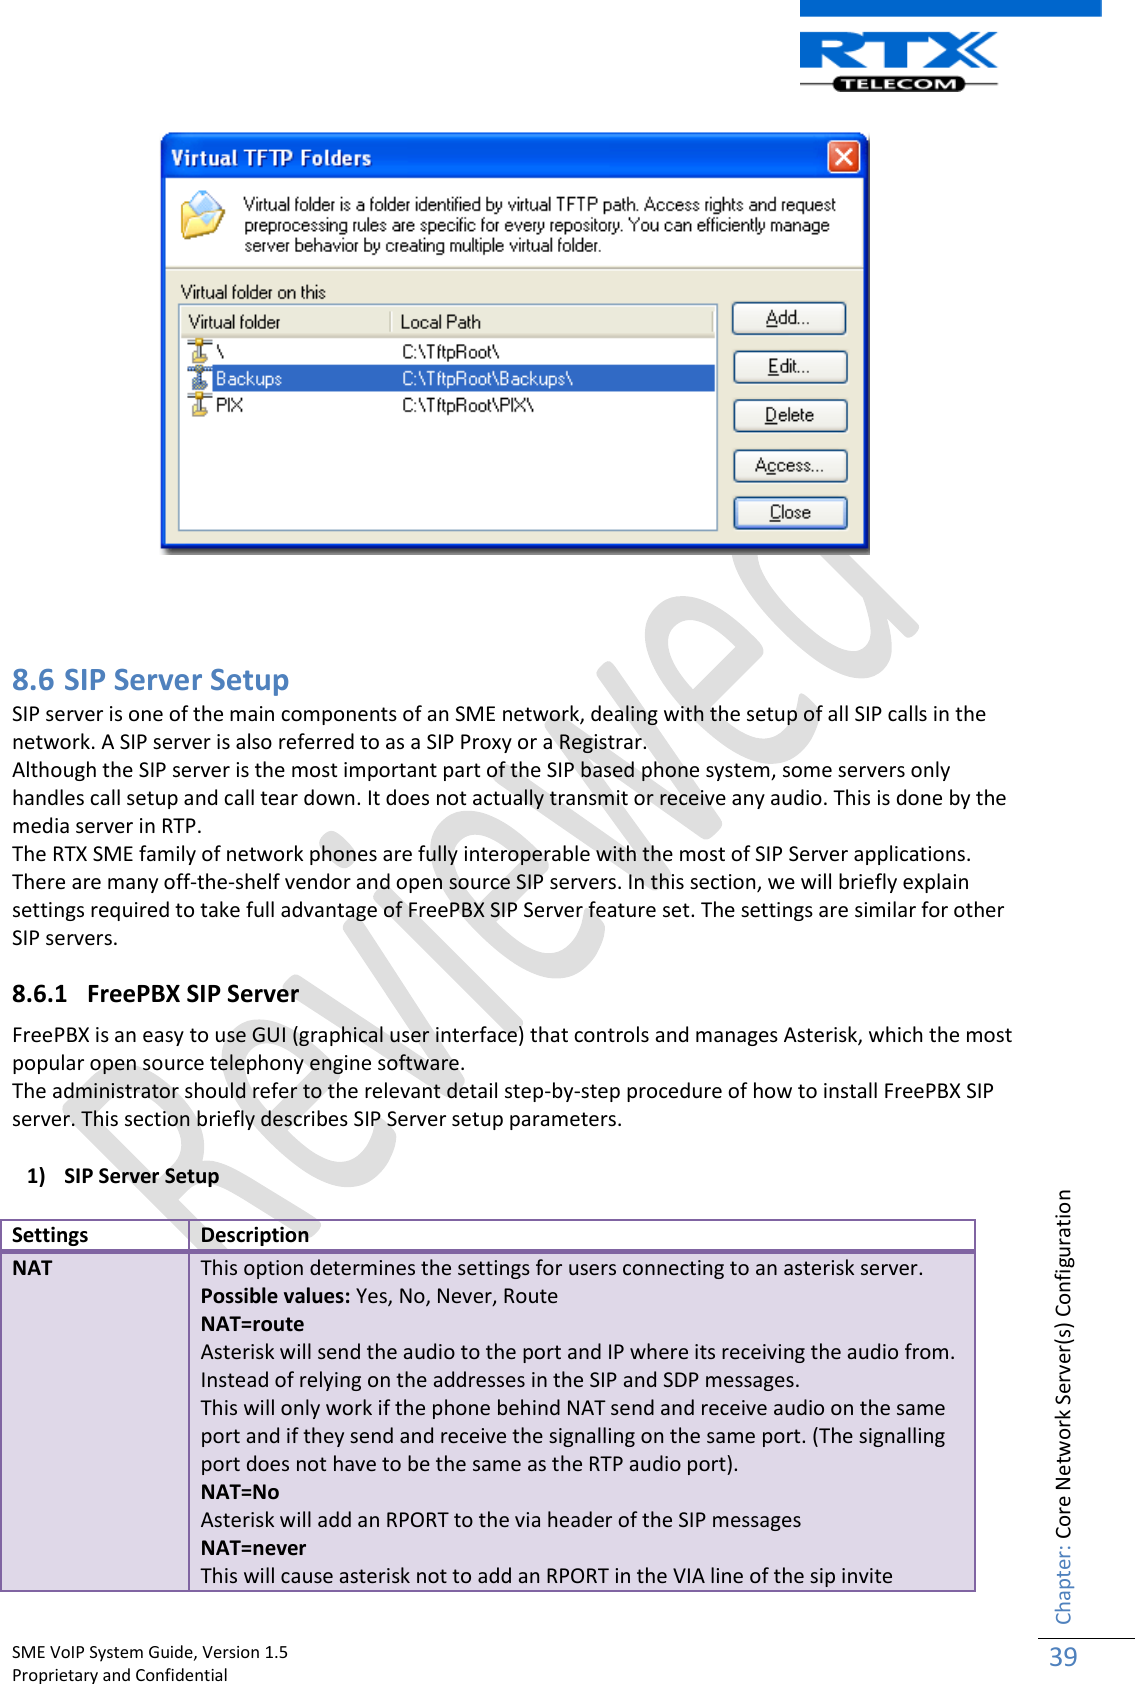    SME VoIP System Guide, Version 1.5                                                                                                                                                          Proprietary and Confidential    Chapter: Core Network Server(s) Configuration 39      8.6 SIP Server Setup SIP server is one of the main components of an SME network, dealing with the setup of all SIP calls in the network. A SIP server is also referred to as a SIP Proxy or a Registrar. Although the SIP server is the most important part of the SIP based phone system, some servers only handles call setup and call tear down. It does not actually transmit or receive any audio. This is done by the media server in RTP. The RTX SME family of network phones are fully interoperable with the most of SIP Server applications. There are many off-the-shelf vendor and open source SIP servers. In this section, we will briefly explain settings required to take full advantage of FreePBX SIP Server feature set. The settings are similar for other SIP servers. 8.6.1 FreePBX SIP Server FreePBX is an easy to use GUI (graphical user interface) that controls and manages Asterisk, which the most popular open source telephony engine software. The administrator should refer to the relevant detail step-by-step procedure of how to install FreePBX SIP server. This section briefly describes SIP Server setup parameters. 1) SIP Server Setup Settings Description NAT This option determines the settings for users connecting to an asterisk server. Possible values: Yes, No, Never, Route NAT=route Asterisk will send the audio to the port and IP where its receiving the audio from. Instead of relying on the addresses in the SIP and SDP messages. This will only work if the phone behind NAT send and receive audio on the same port and if they send and receive the signalling on the same port. (The signalling port does not have to be the same as the RTP audio port). NAT=No Asterisk will add an RPORT to the via header of the SIP messages NAT=never This will cause asterisk not to add an RPORT in the VIA line of the sip invite 